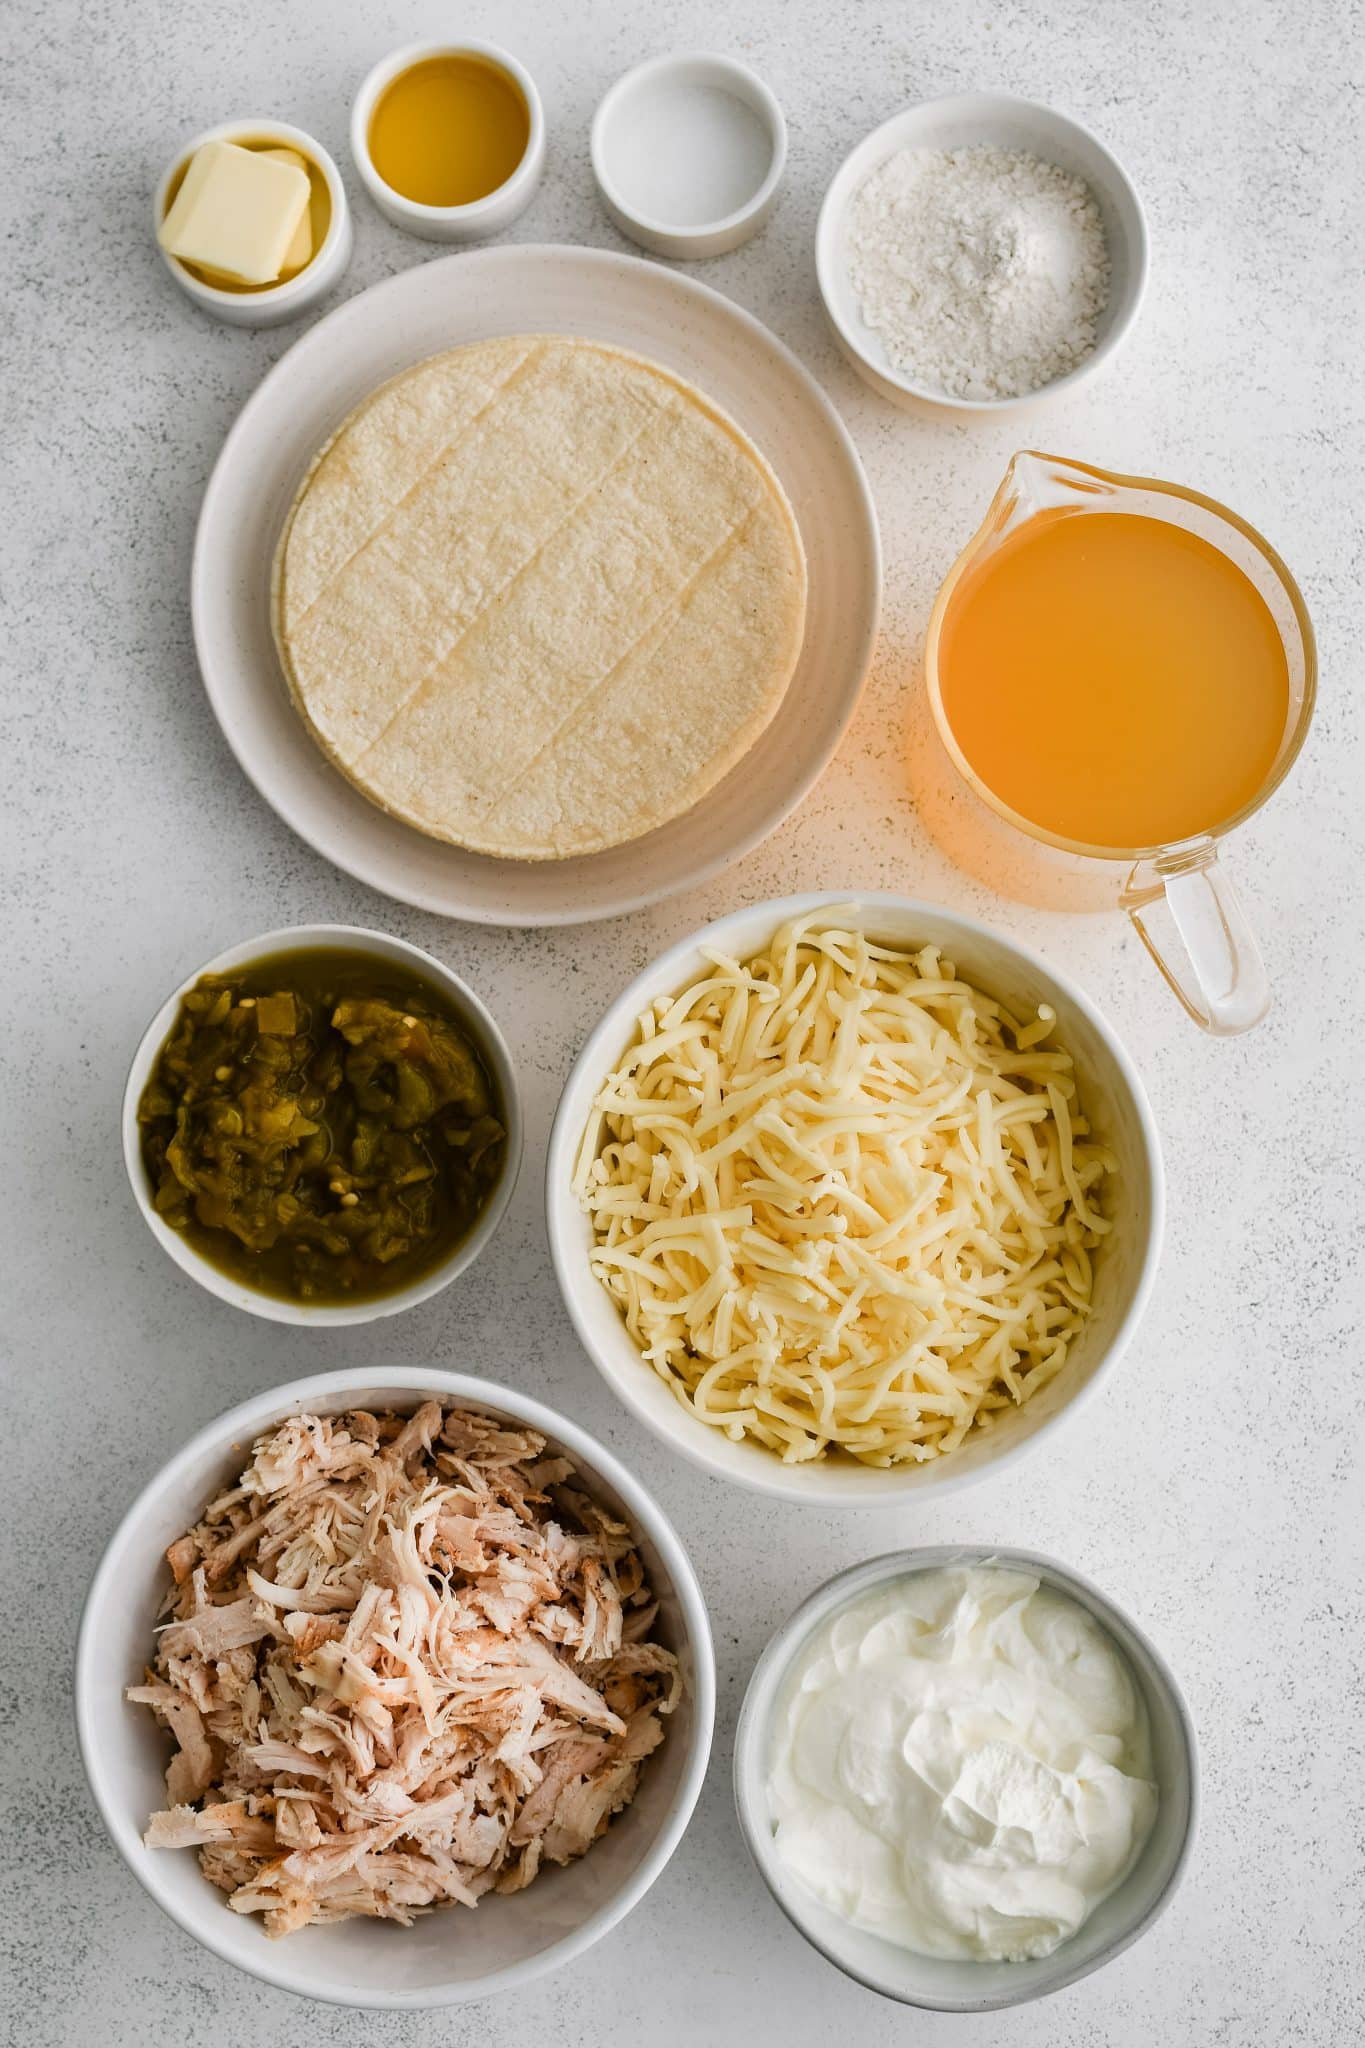 All of the ingredients for sour cream chicken enchiladas recipe presented in individual measuring cups and ramekins.